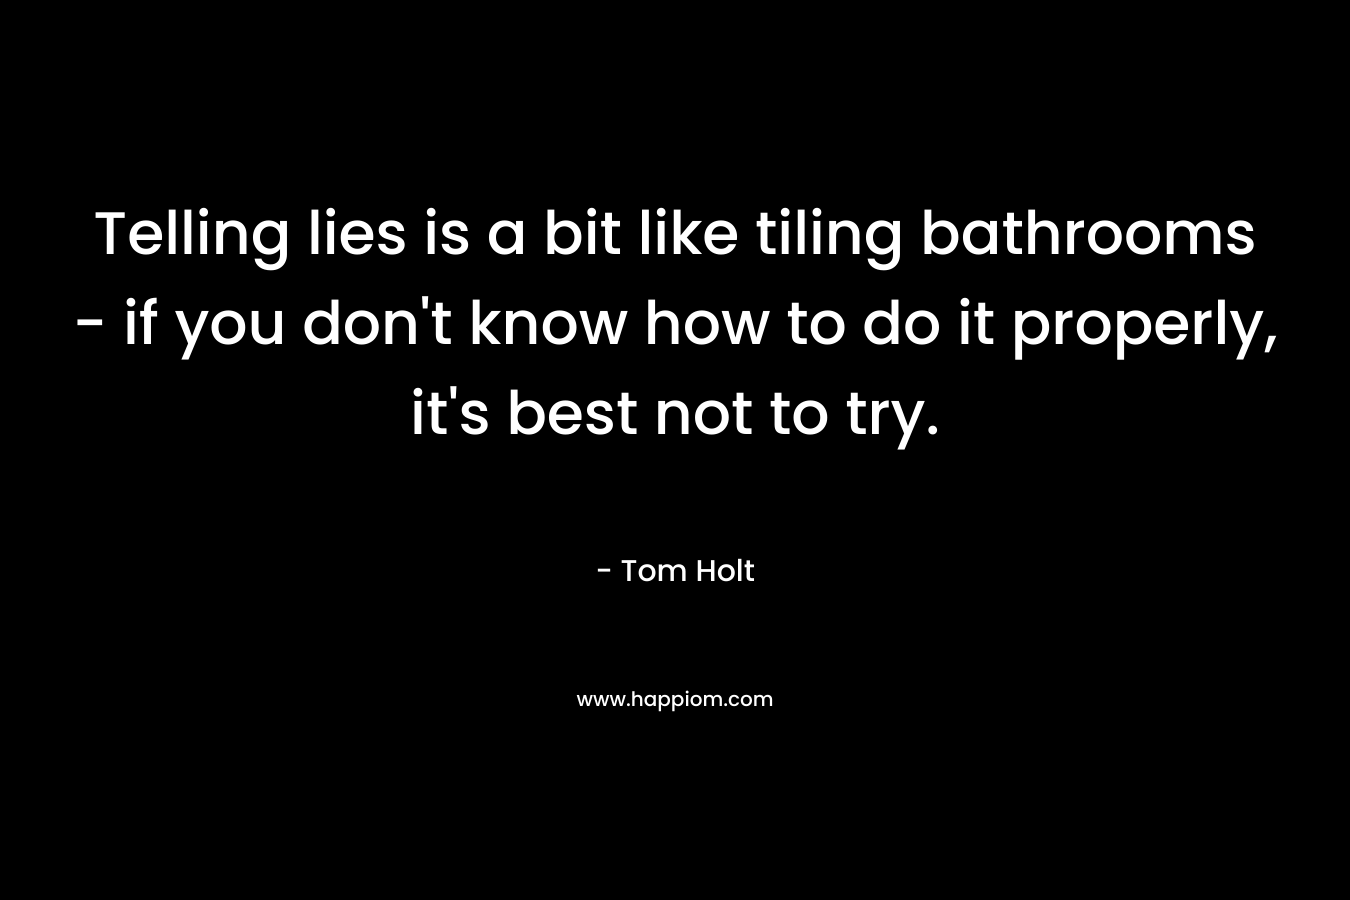 Telling lies is a bit like tiling bathrooms - if you don't know how to do it properly, it's best not to try.